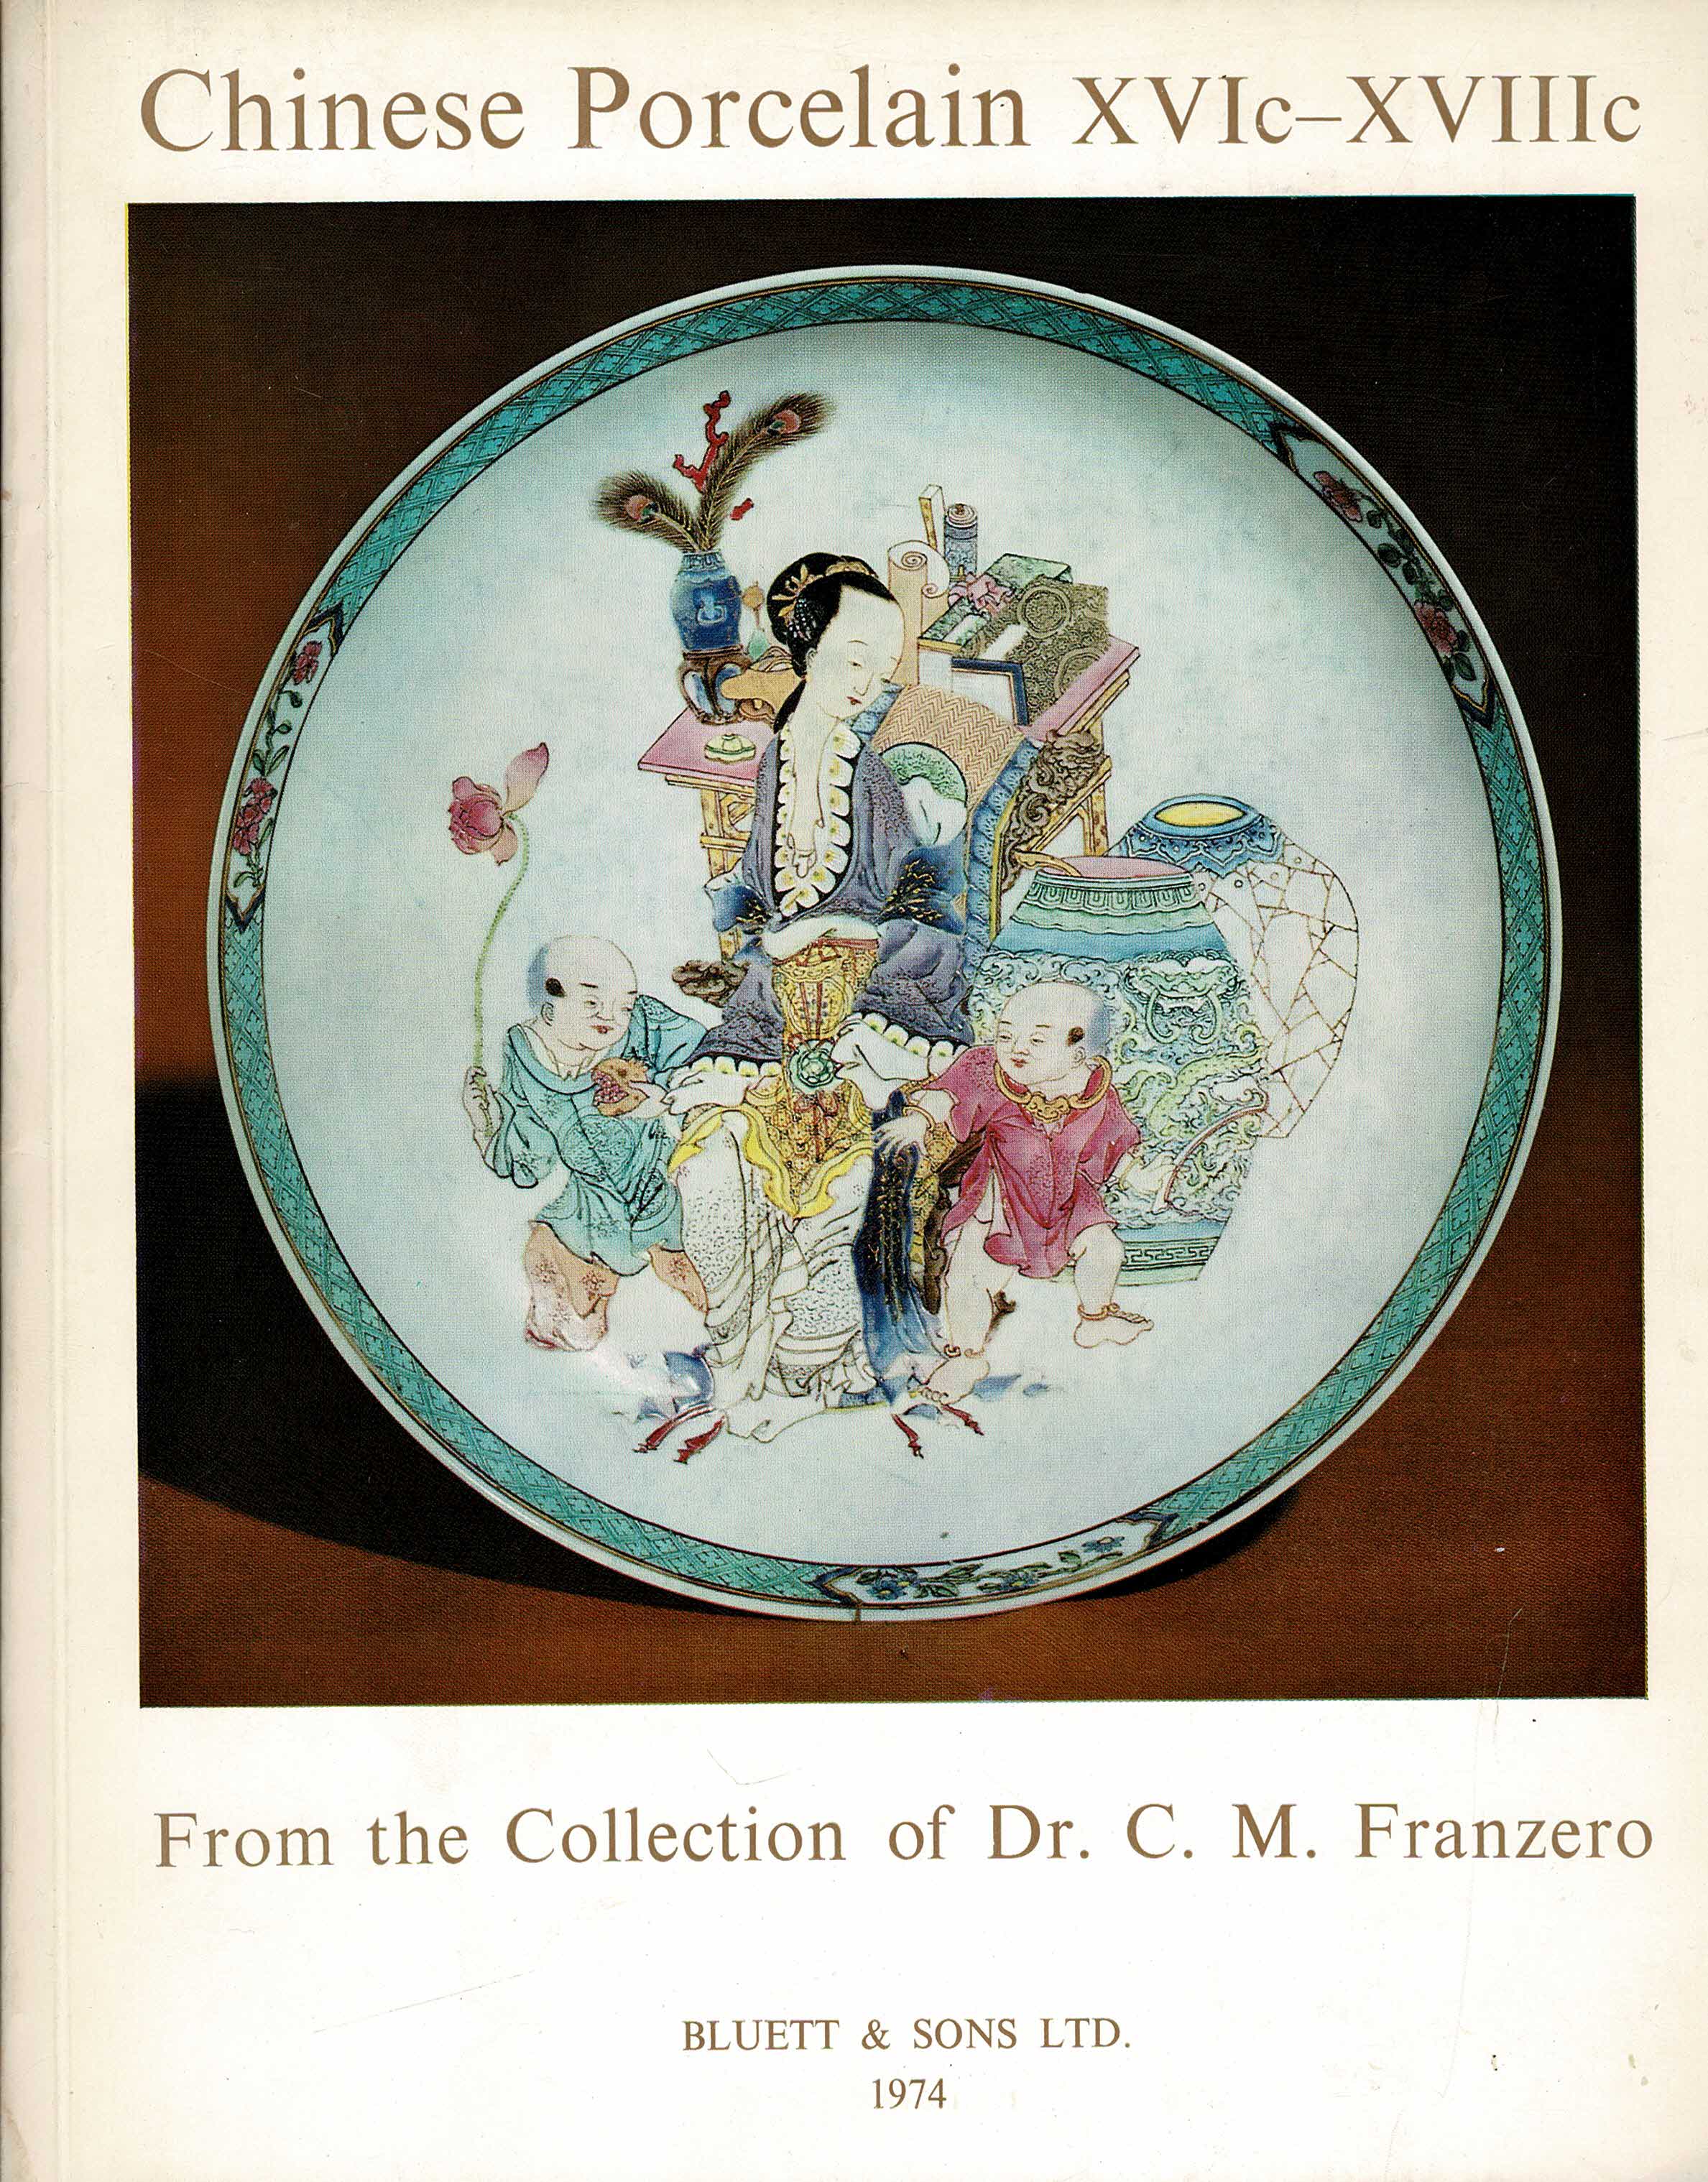 Bluett & Sons Ltd - Chinese Porcelain of the 16th to 18th Centuries from the Collection of Dr. C.M. Franzero